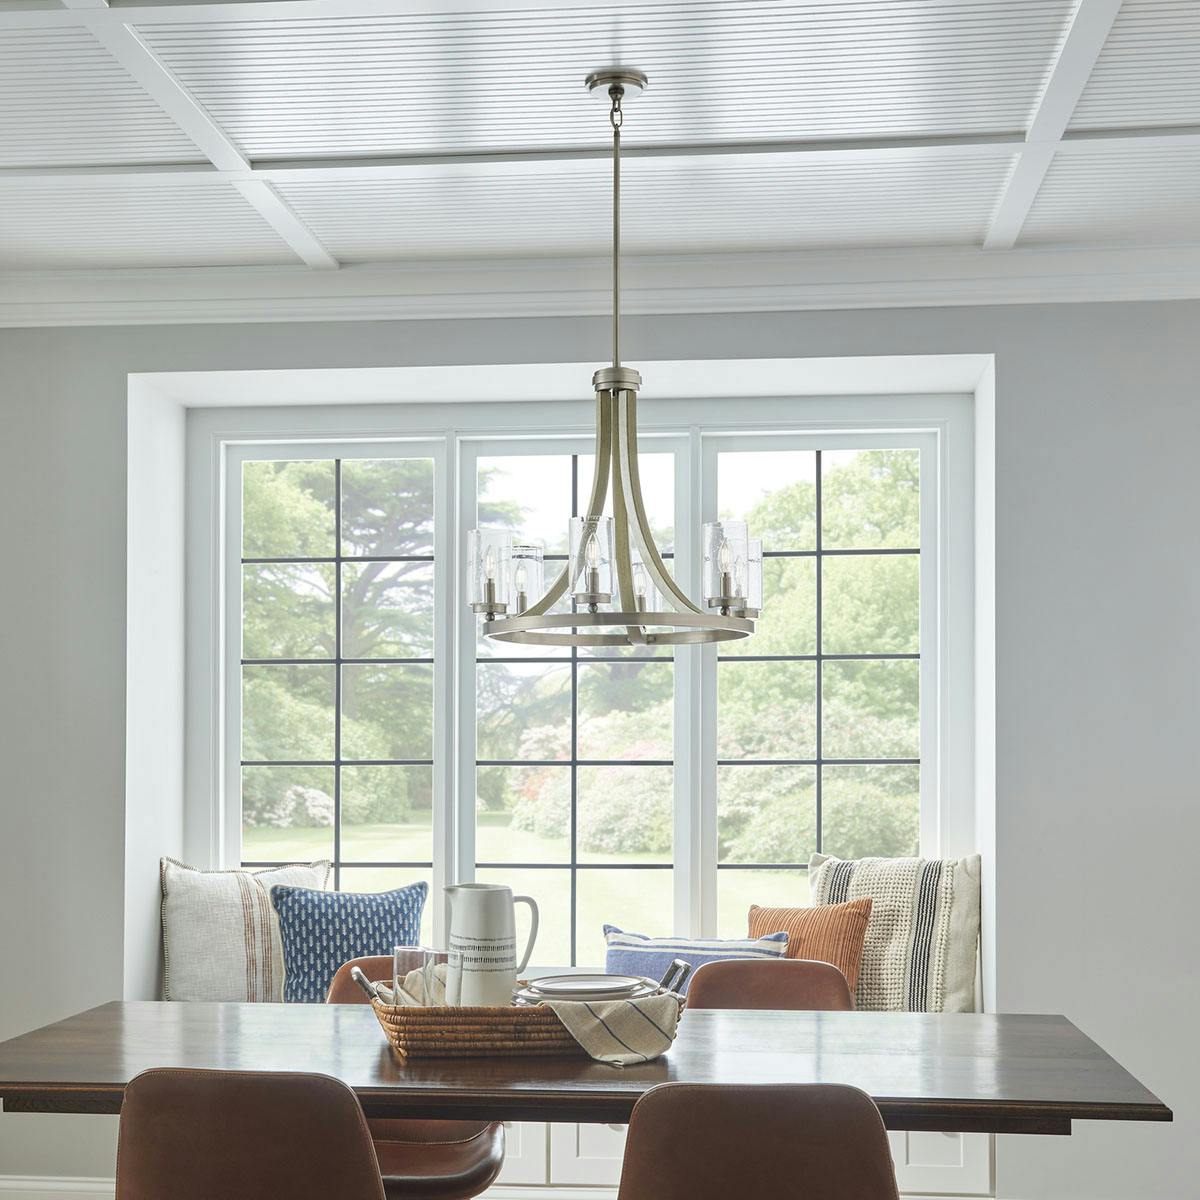 Day time dining room image featuring GrandBank chandelier 43193DAG